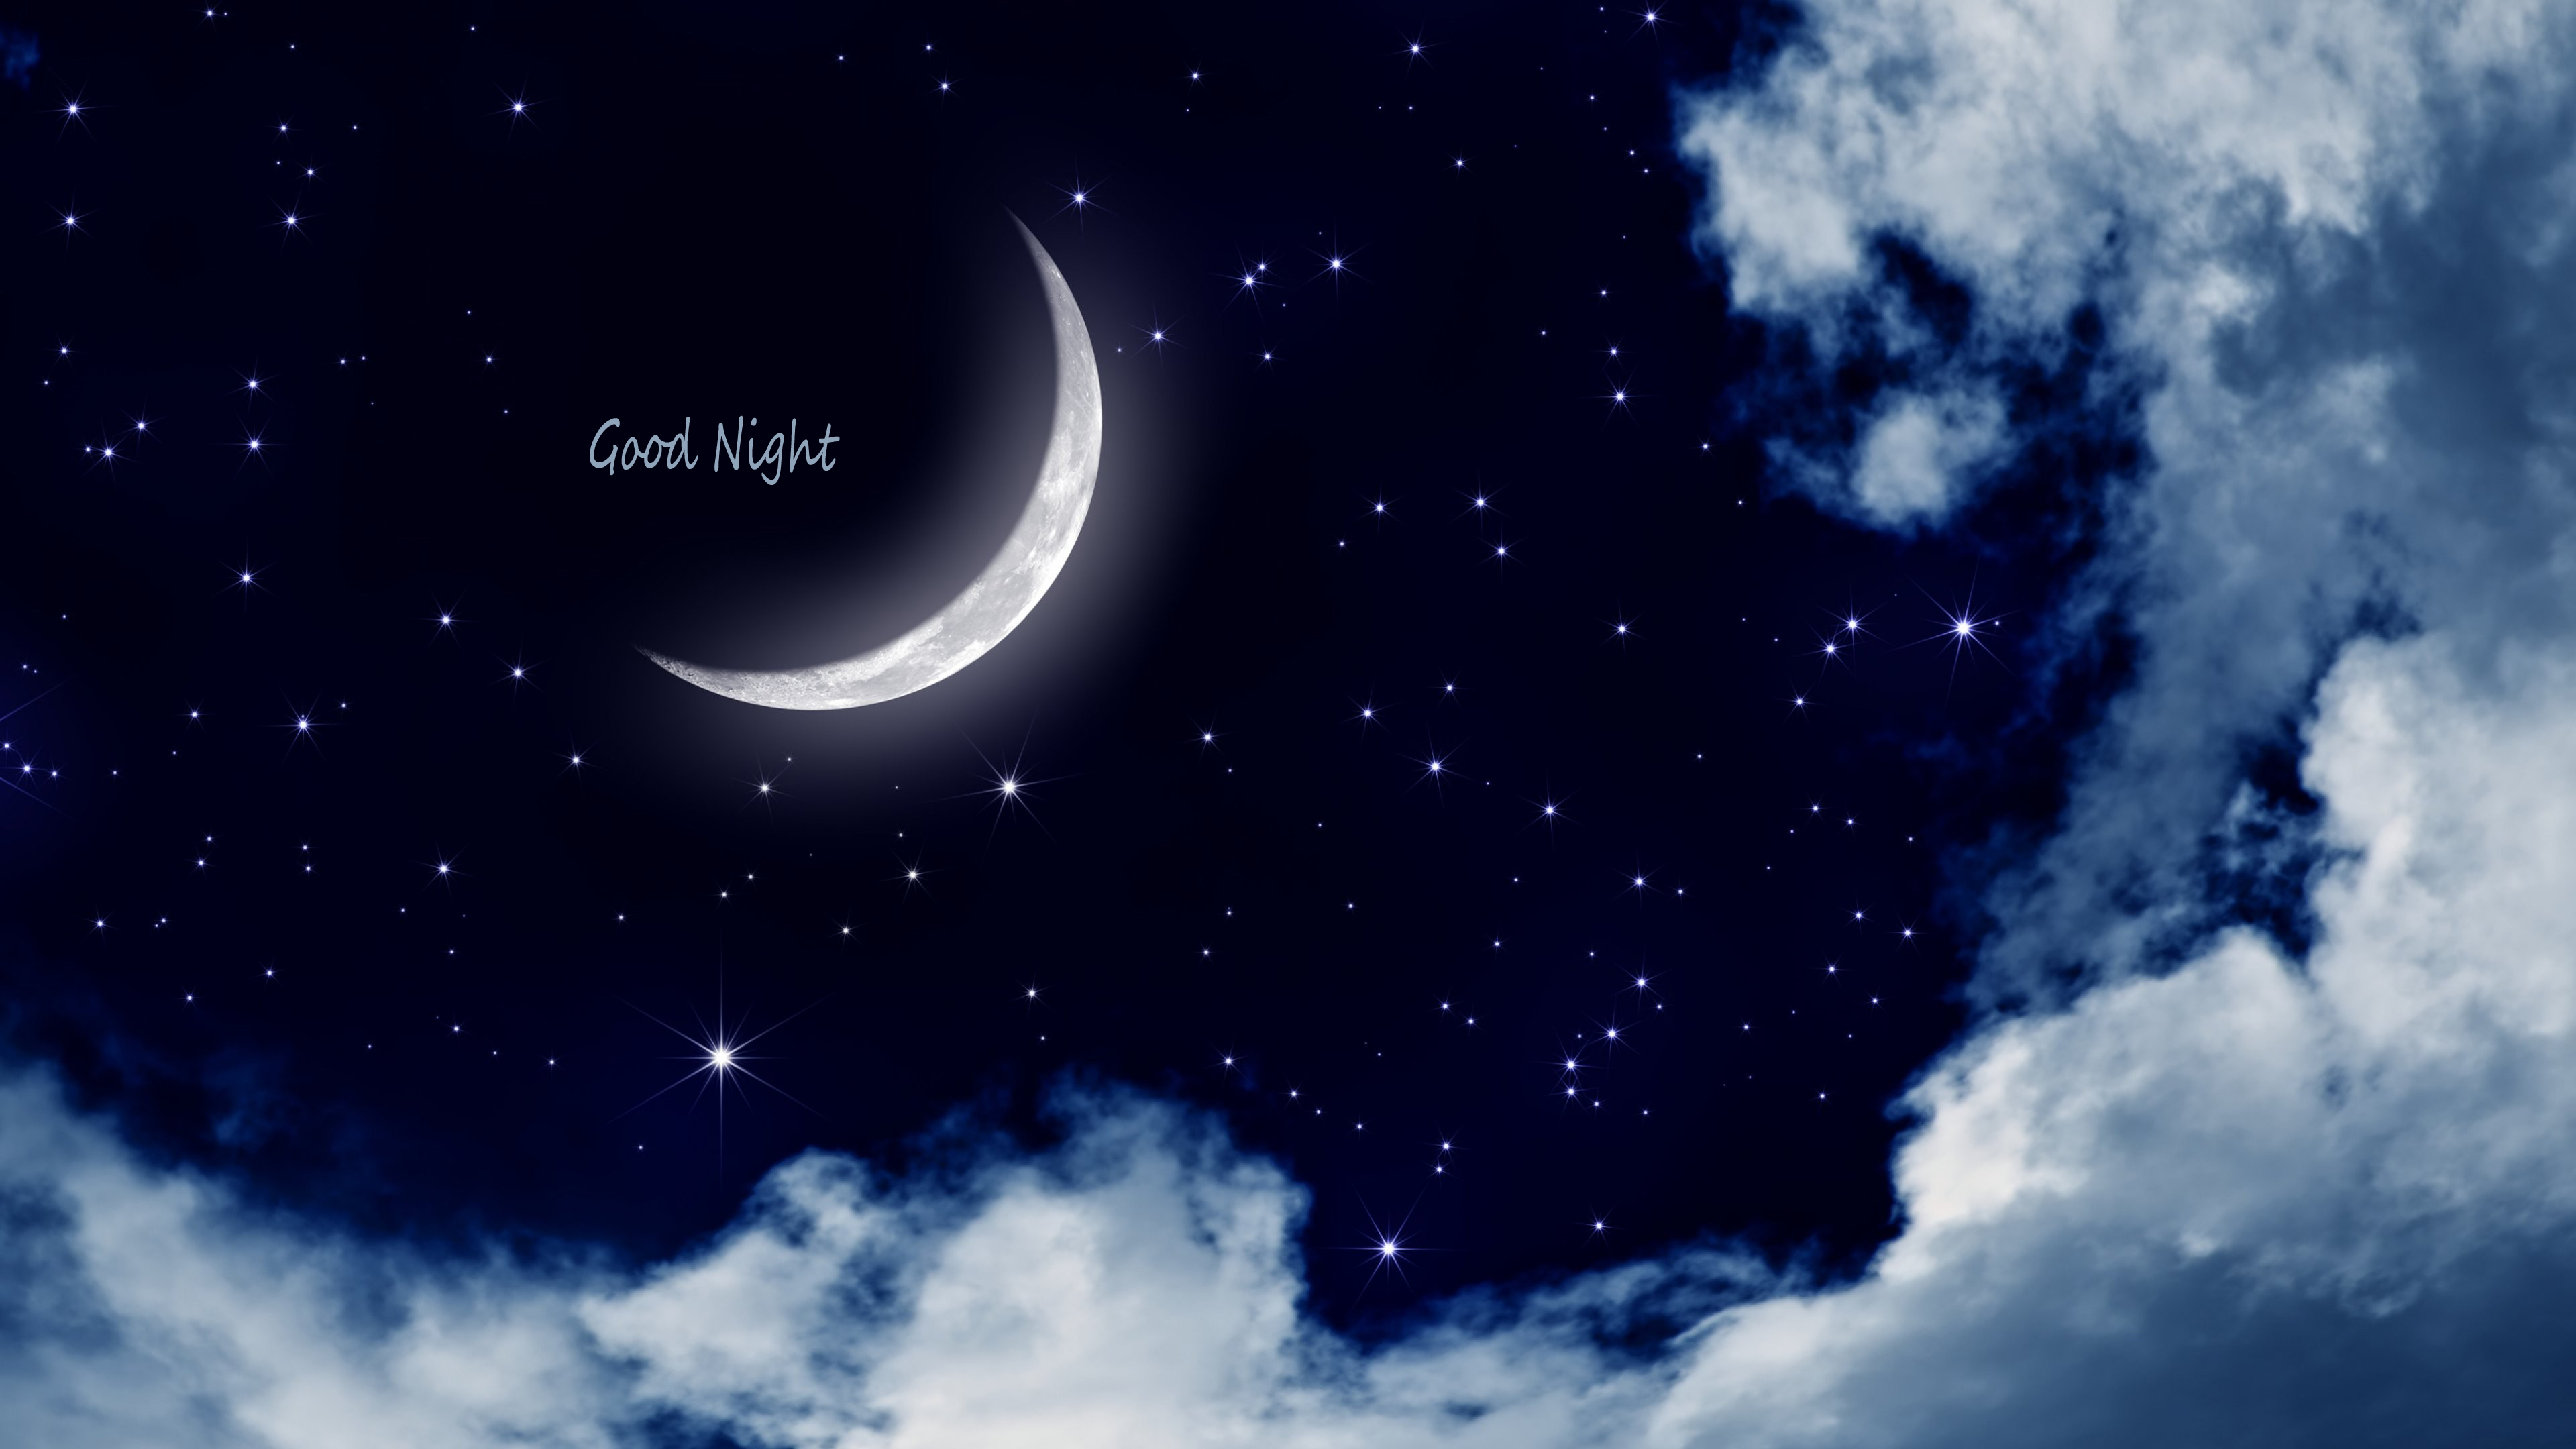 Good Night Wallpapers Pictures Images